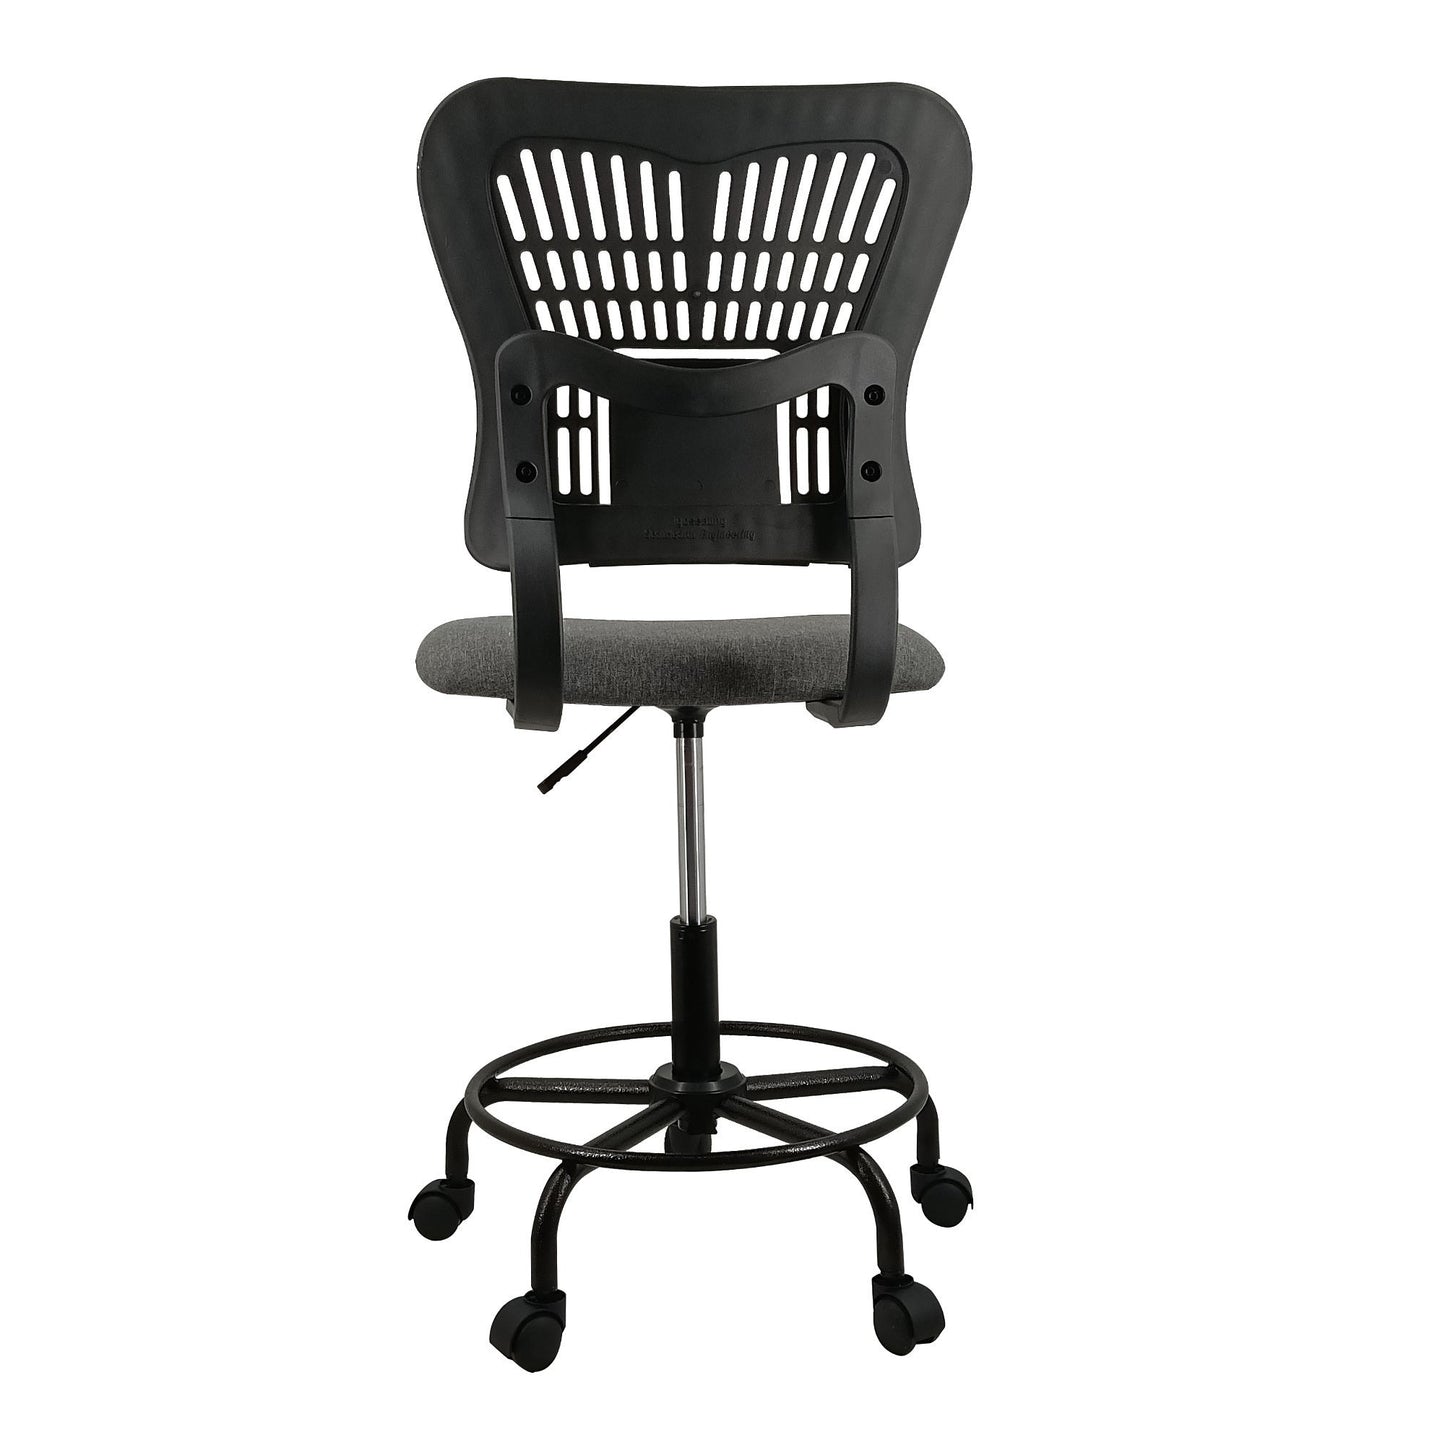 Ergonomic Tall Office Chair Standing Desk Chair Adjustable Foot Ring Office Drafting Chair